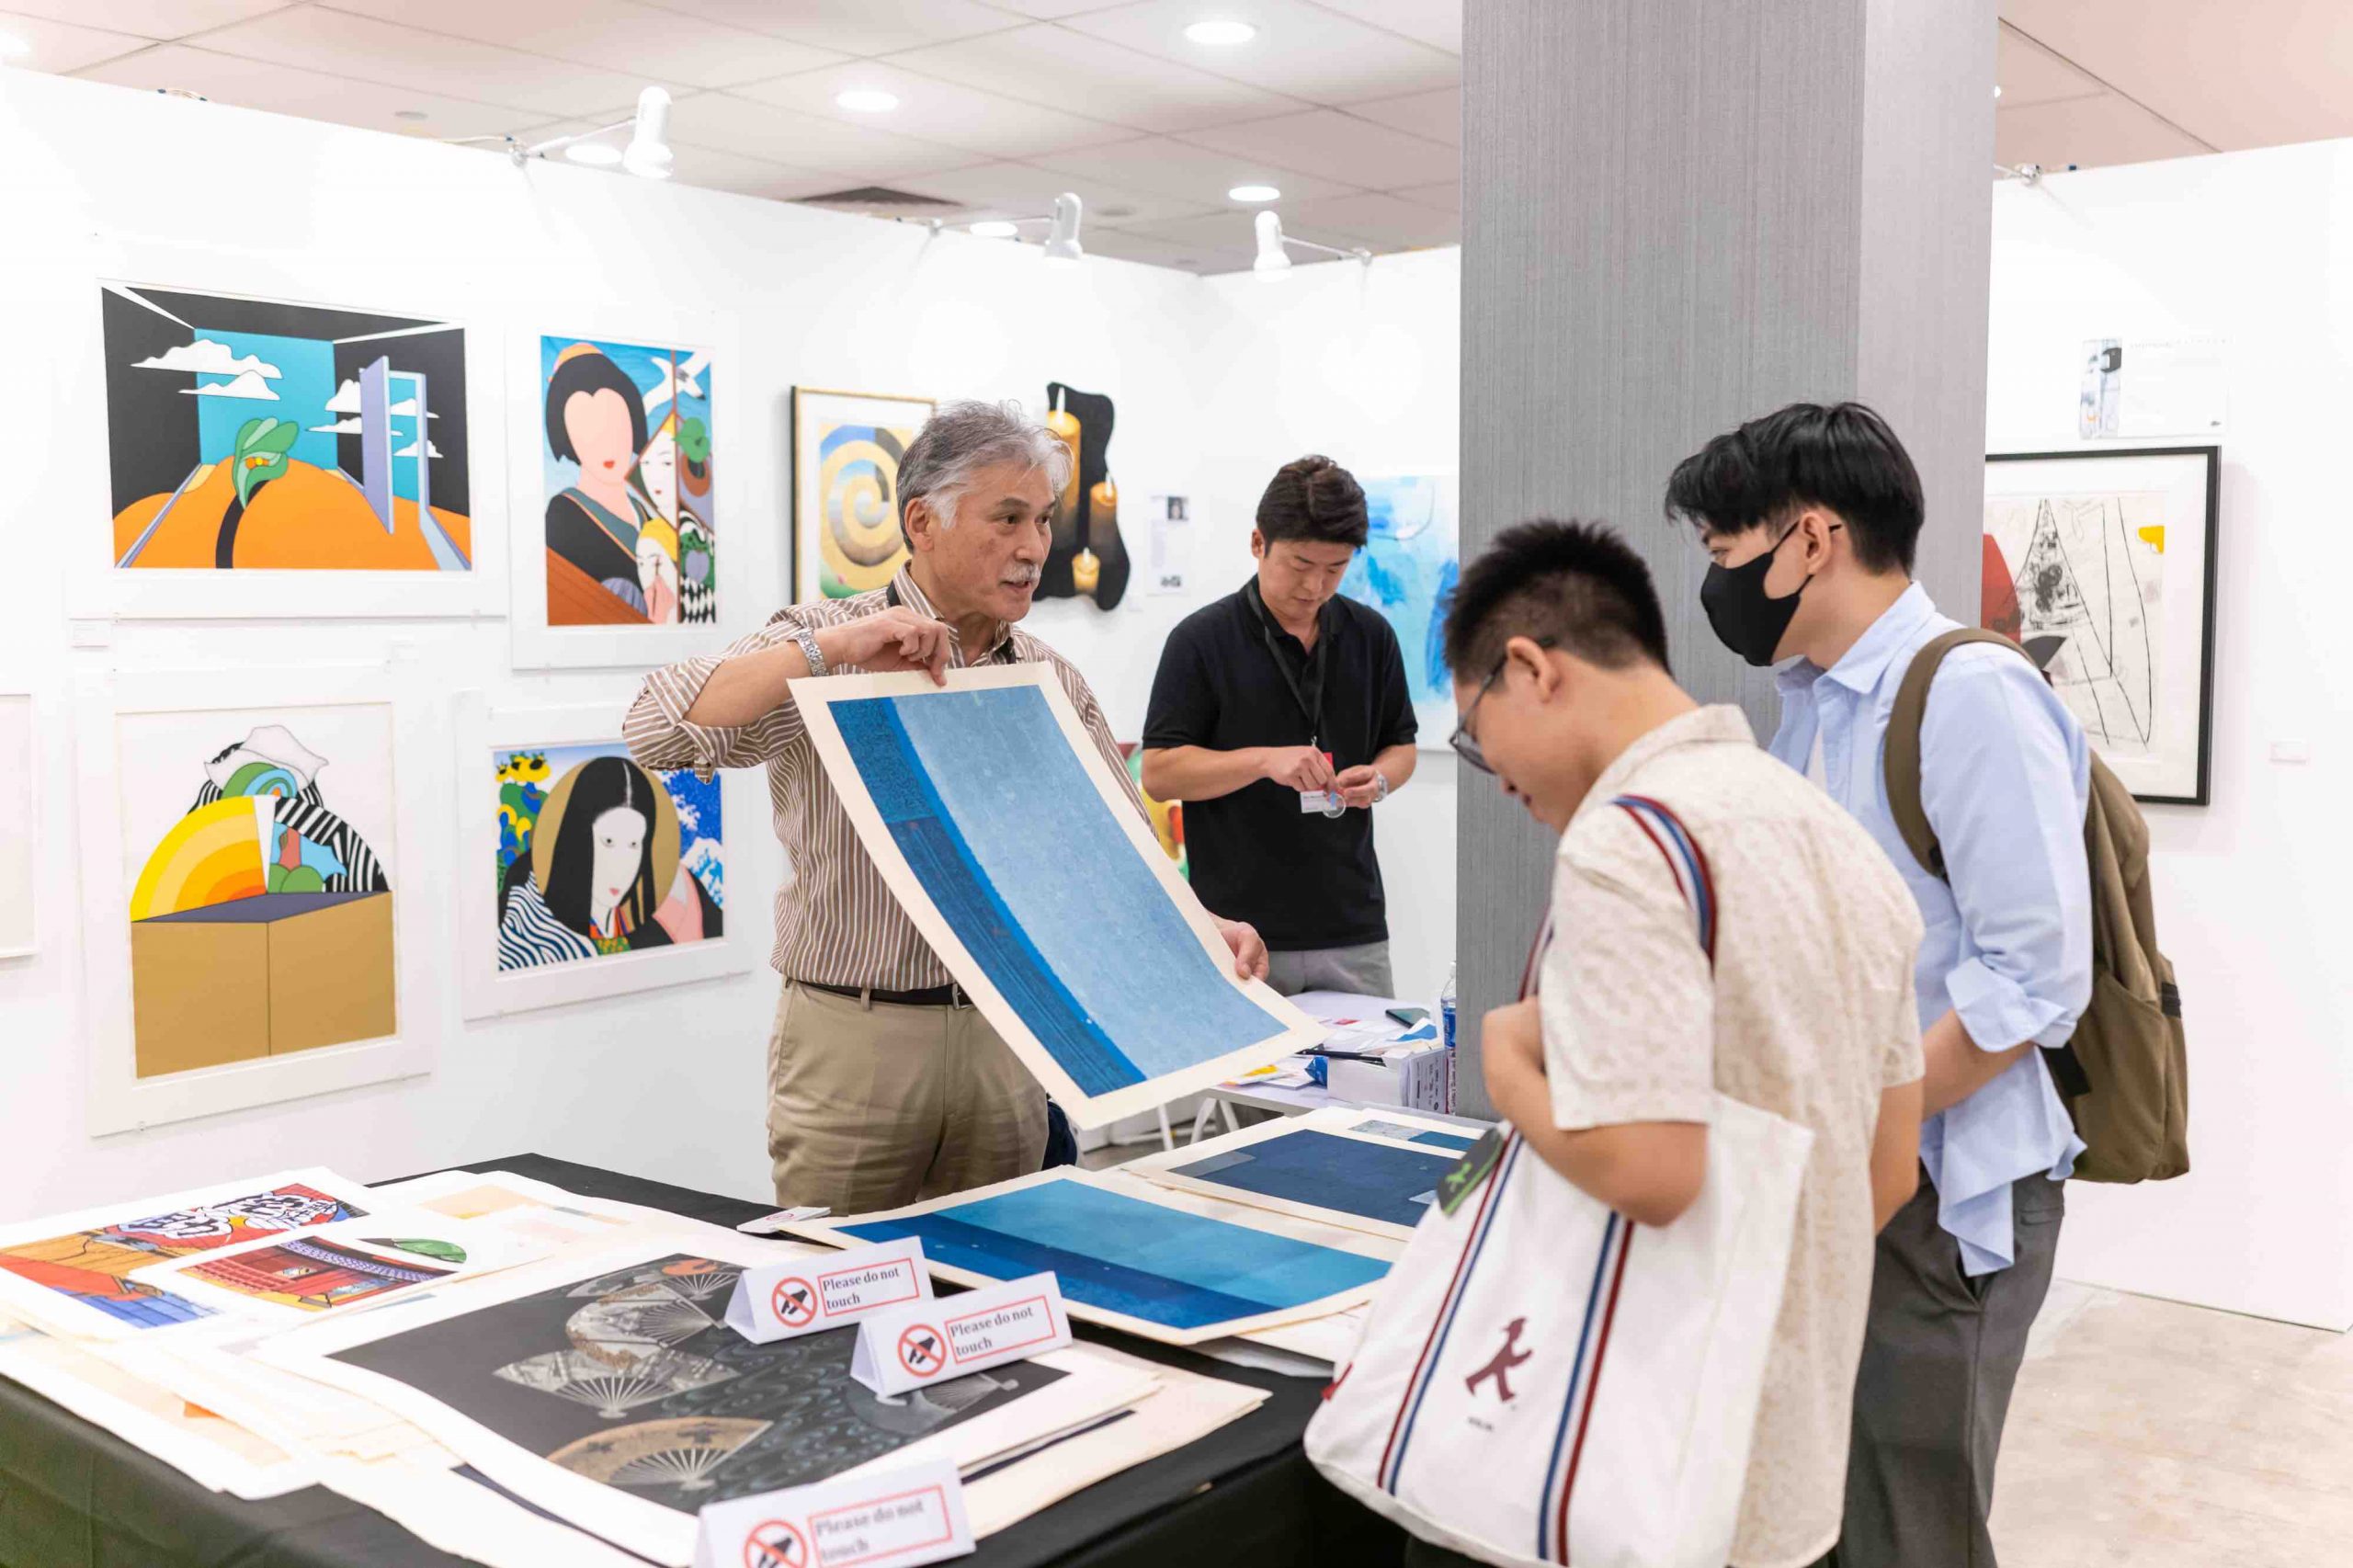 , Affordable Art Fair returns with over 700 artists across 81 galleries this November 2023